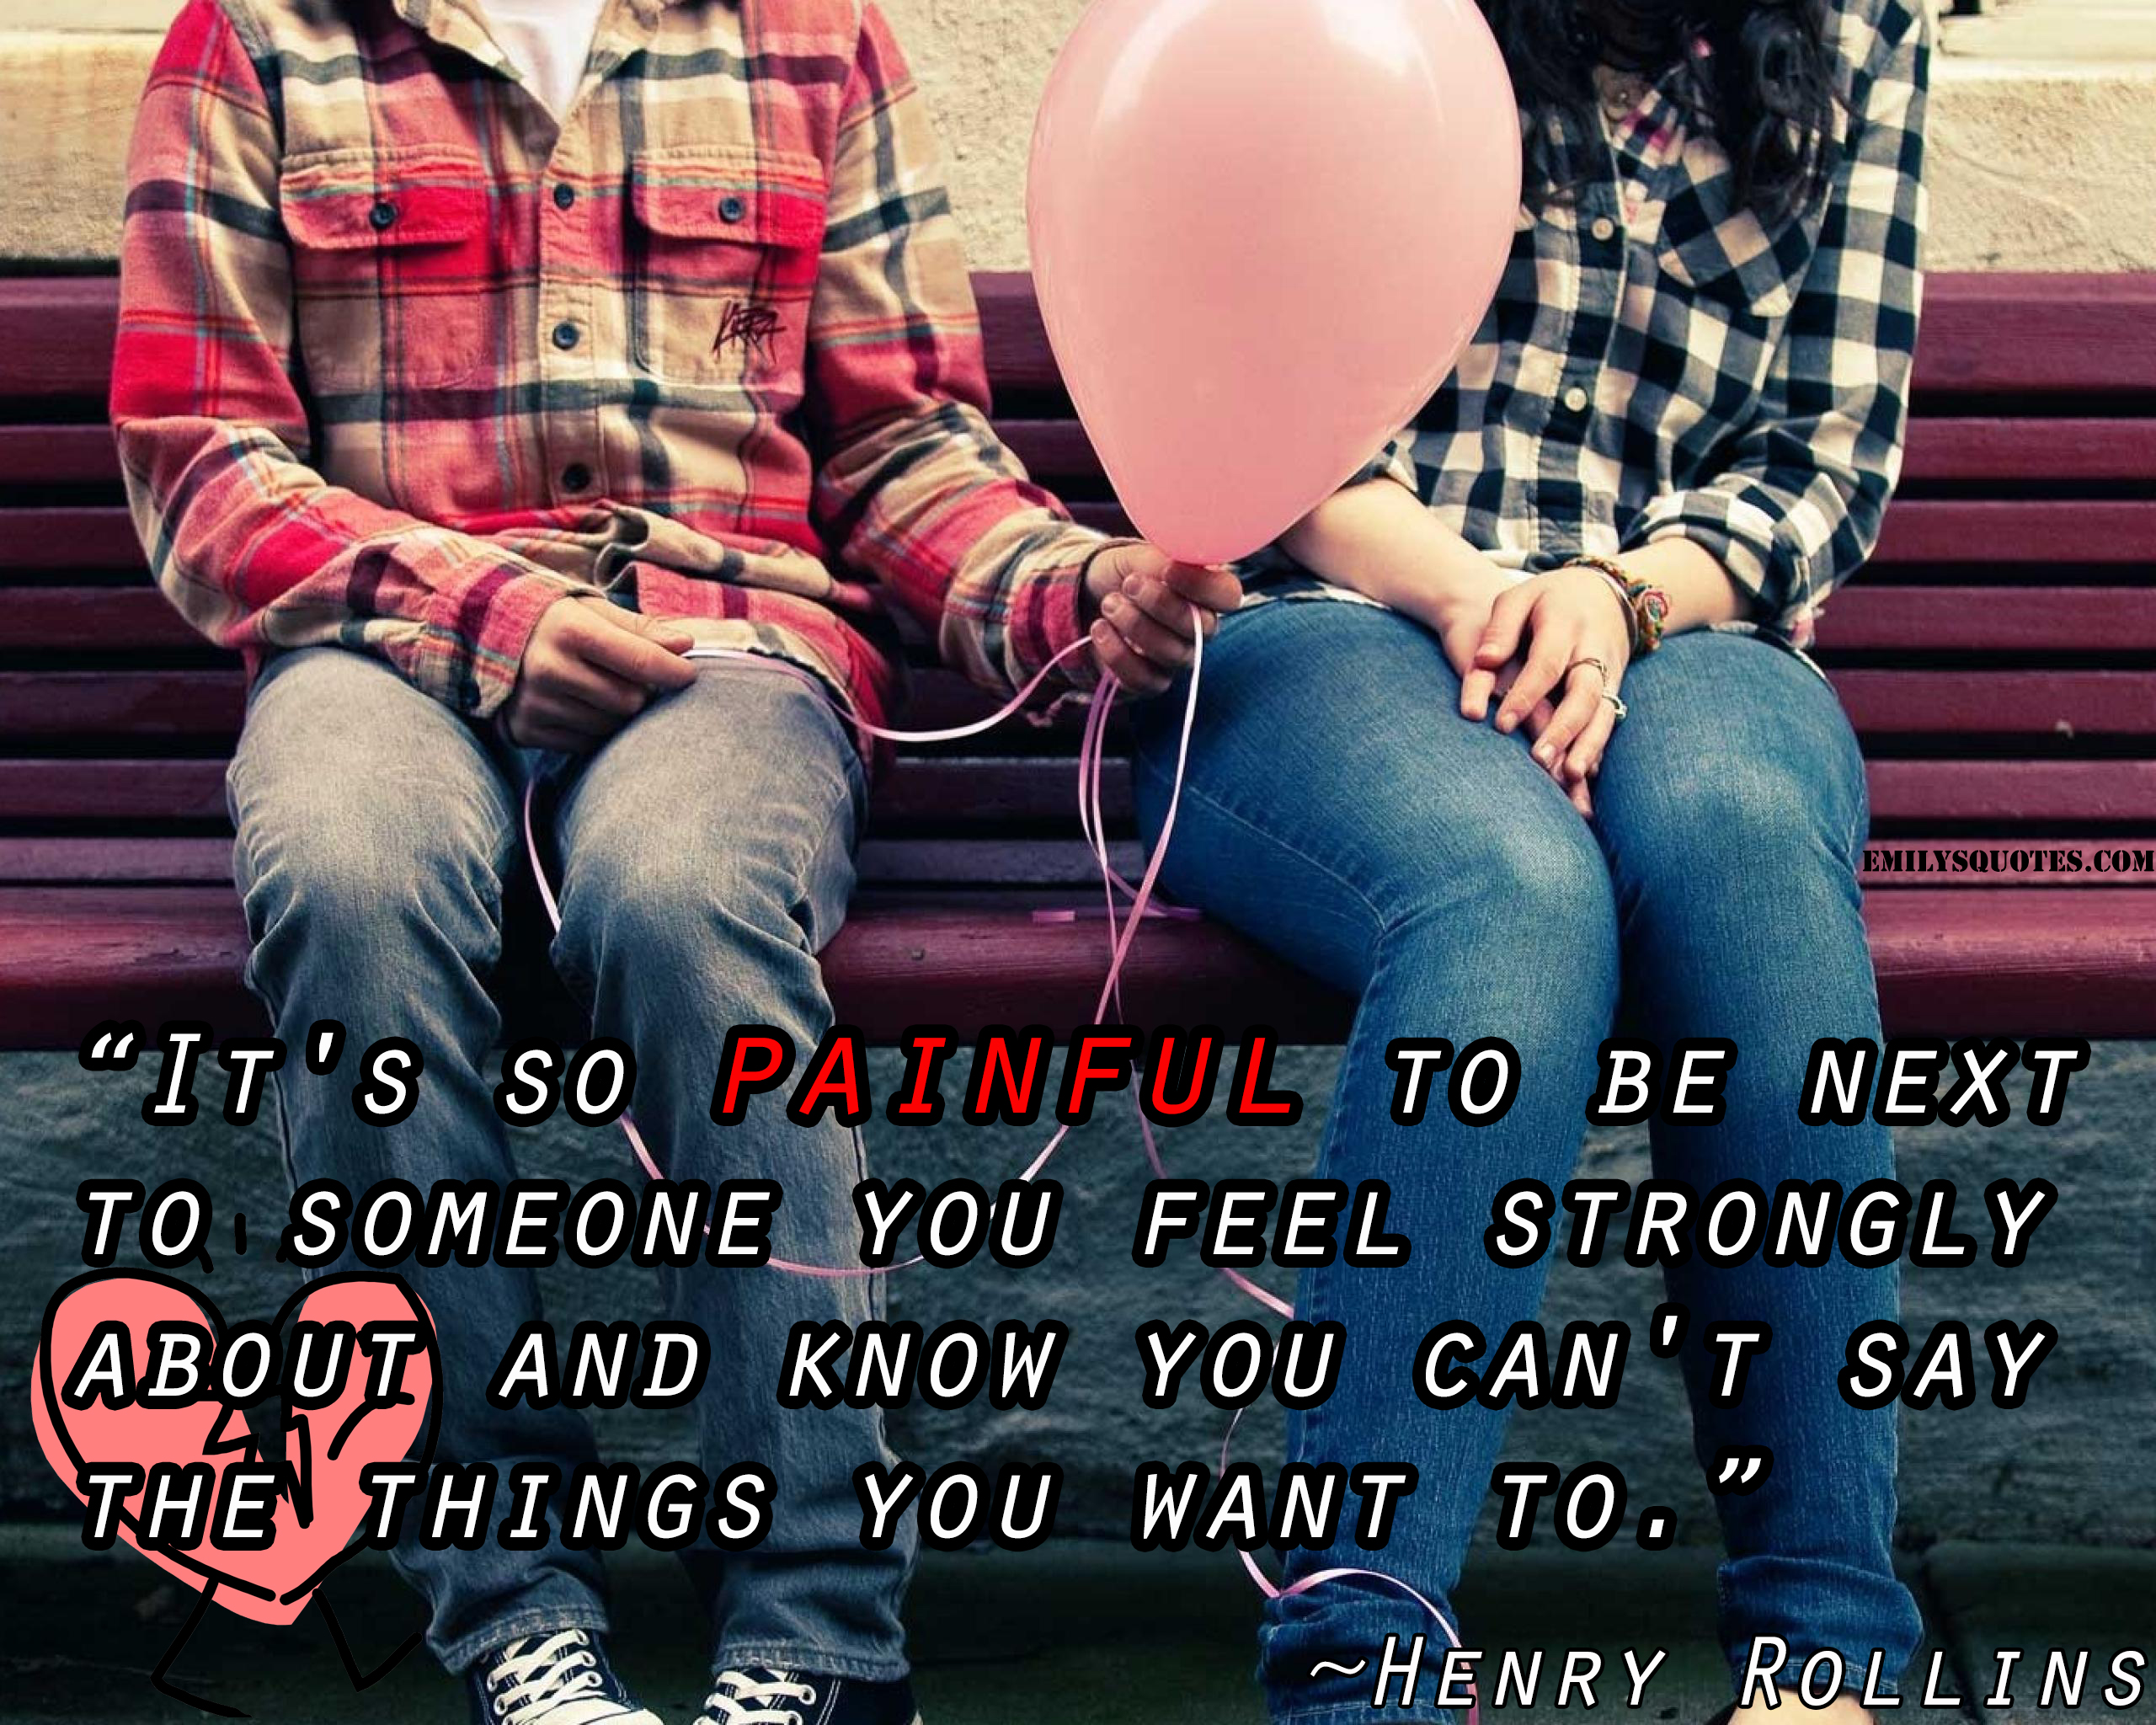 It’s so painful to be next to someone you feel strongly about and know you can’t say the things you want to.